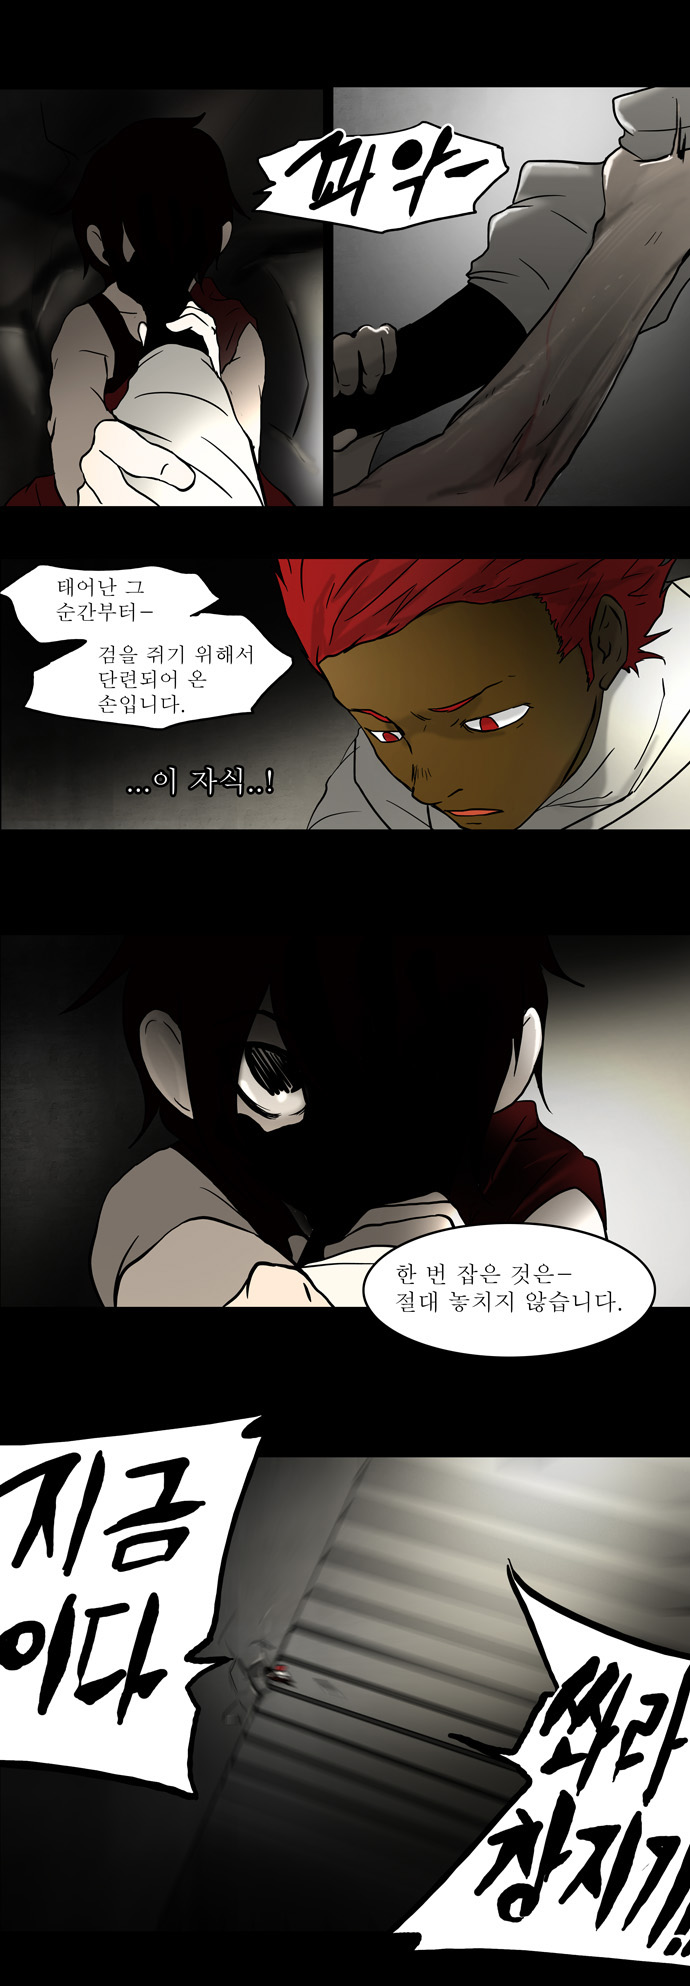 Tower of God - Chapter 47 - Page 1